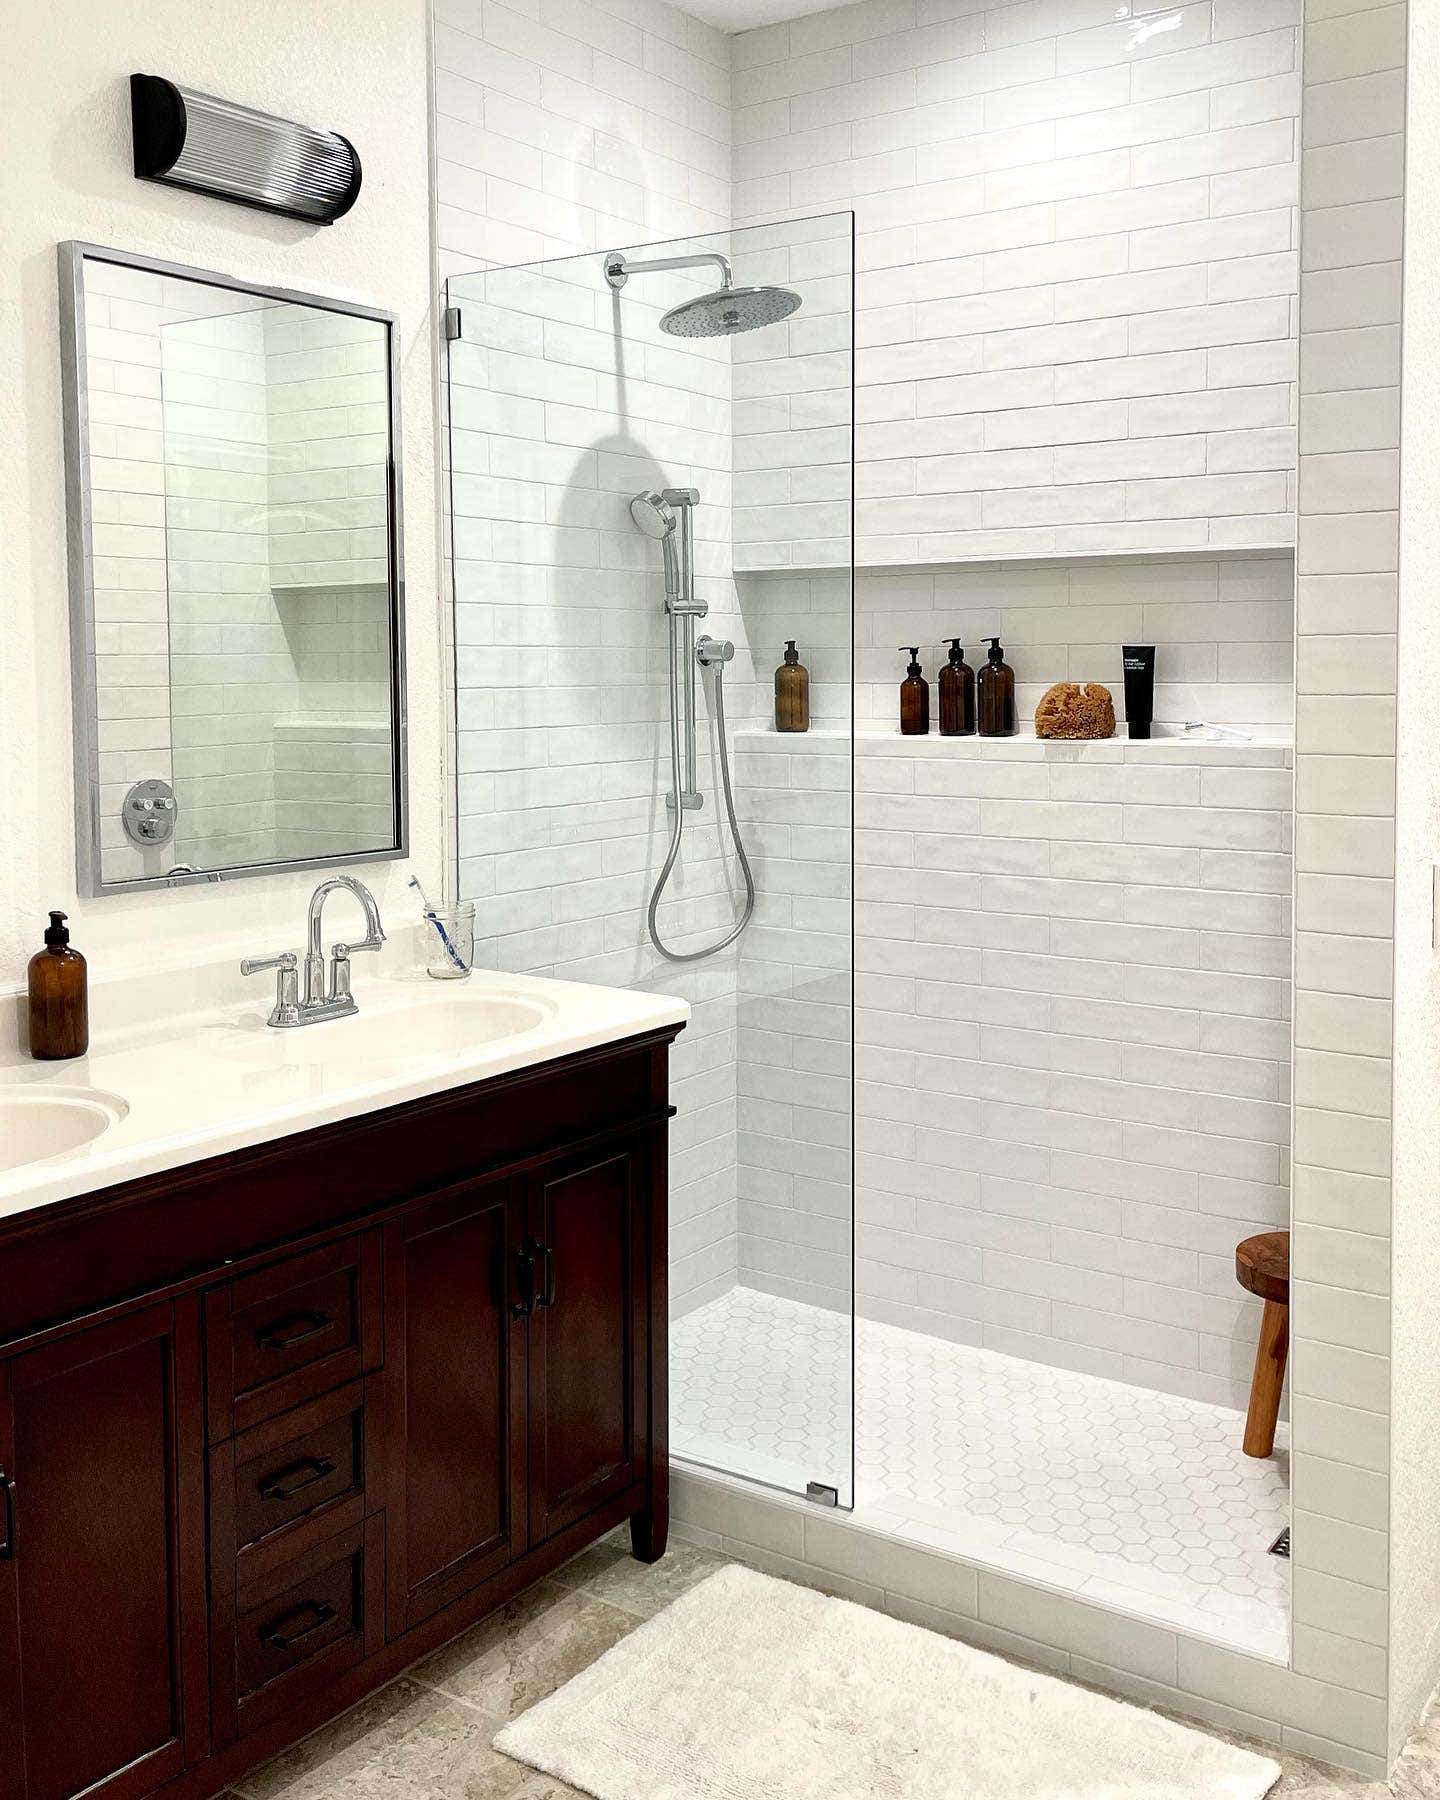 Replace a bathtub with a walk-in shower